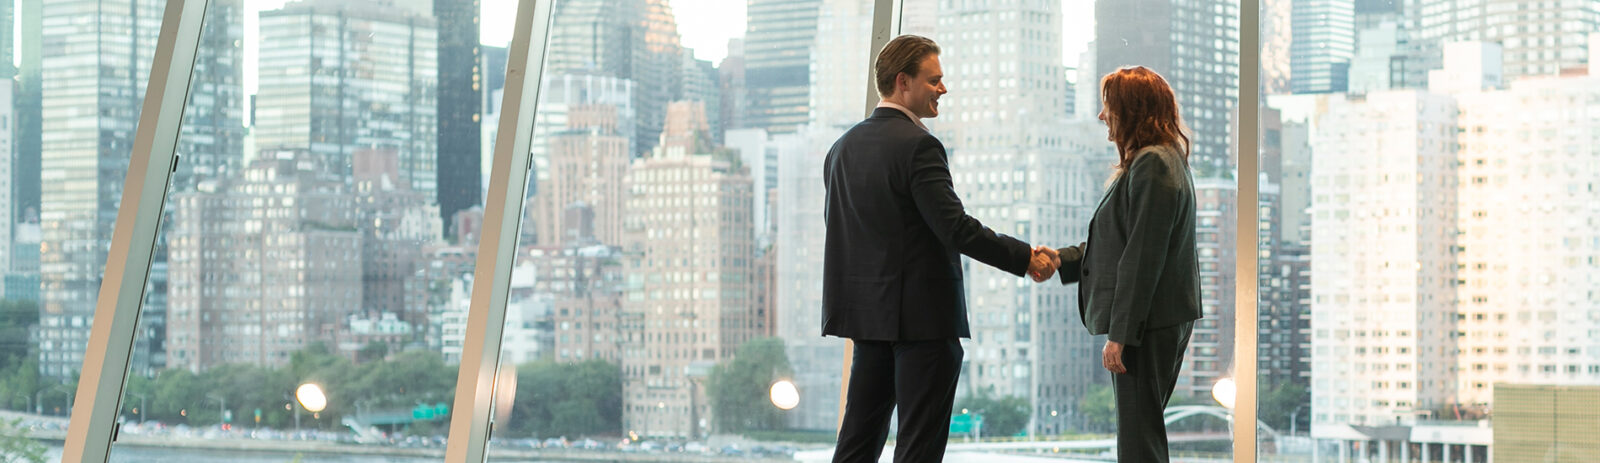 A man in a suit shakes the hand of a woman in a suit in front of a wall of windows with the NYC skyline visible in the background.